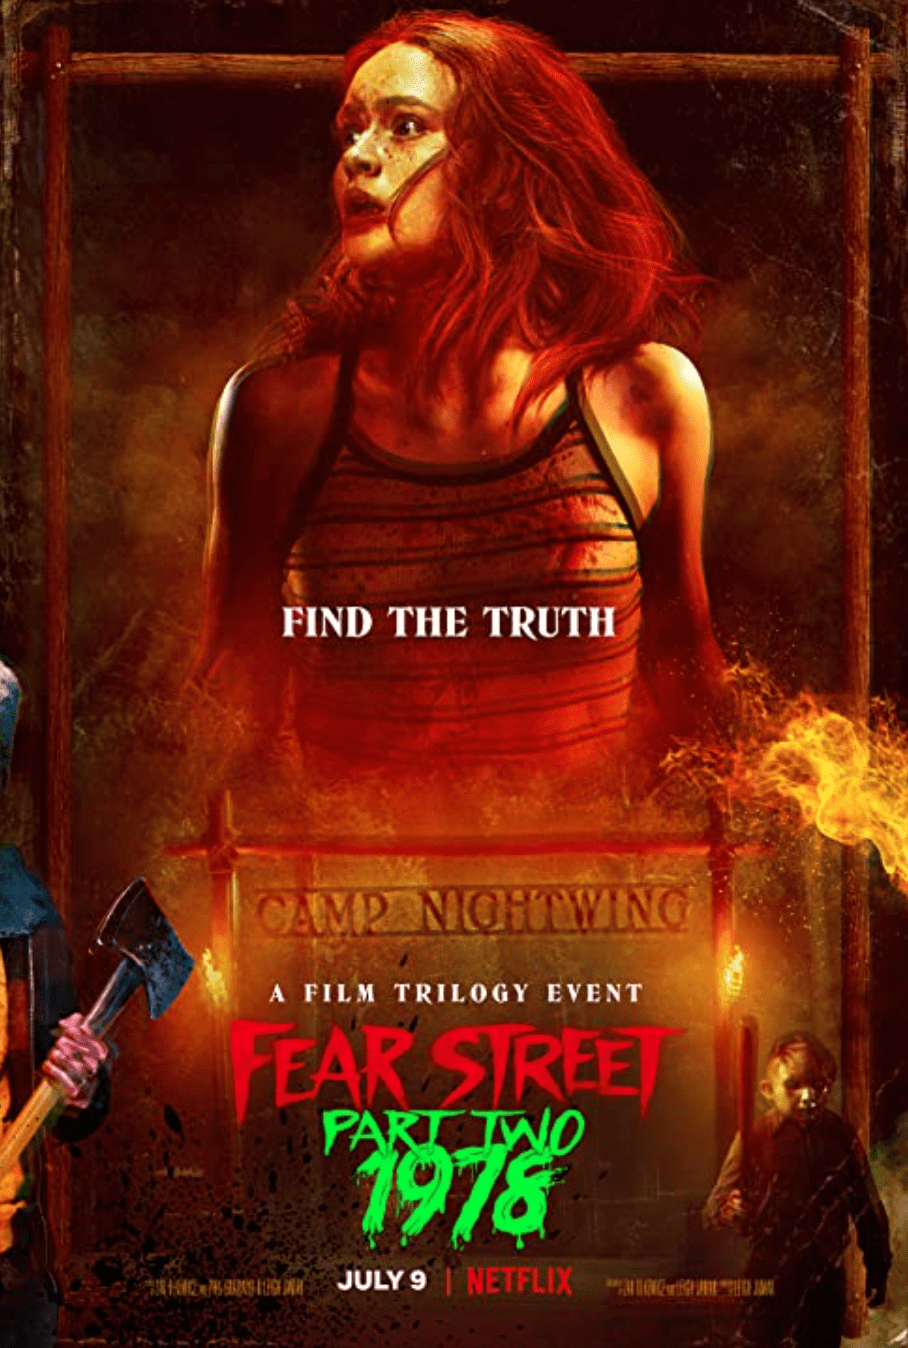 The second installment of the "Fear Street" trilogy, starring Sadie Sink, is a slasher film set at a summer camp in 1978 called "Camp Nightwing," a clear homage to "Friday the 13th." The obvious evocation of a horror classic, along with eerie similarities to "Stranger Things" show how the trilogy took inspiration from earlier works. Photo Courtesy of Netflix